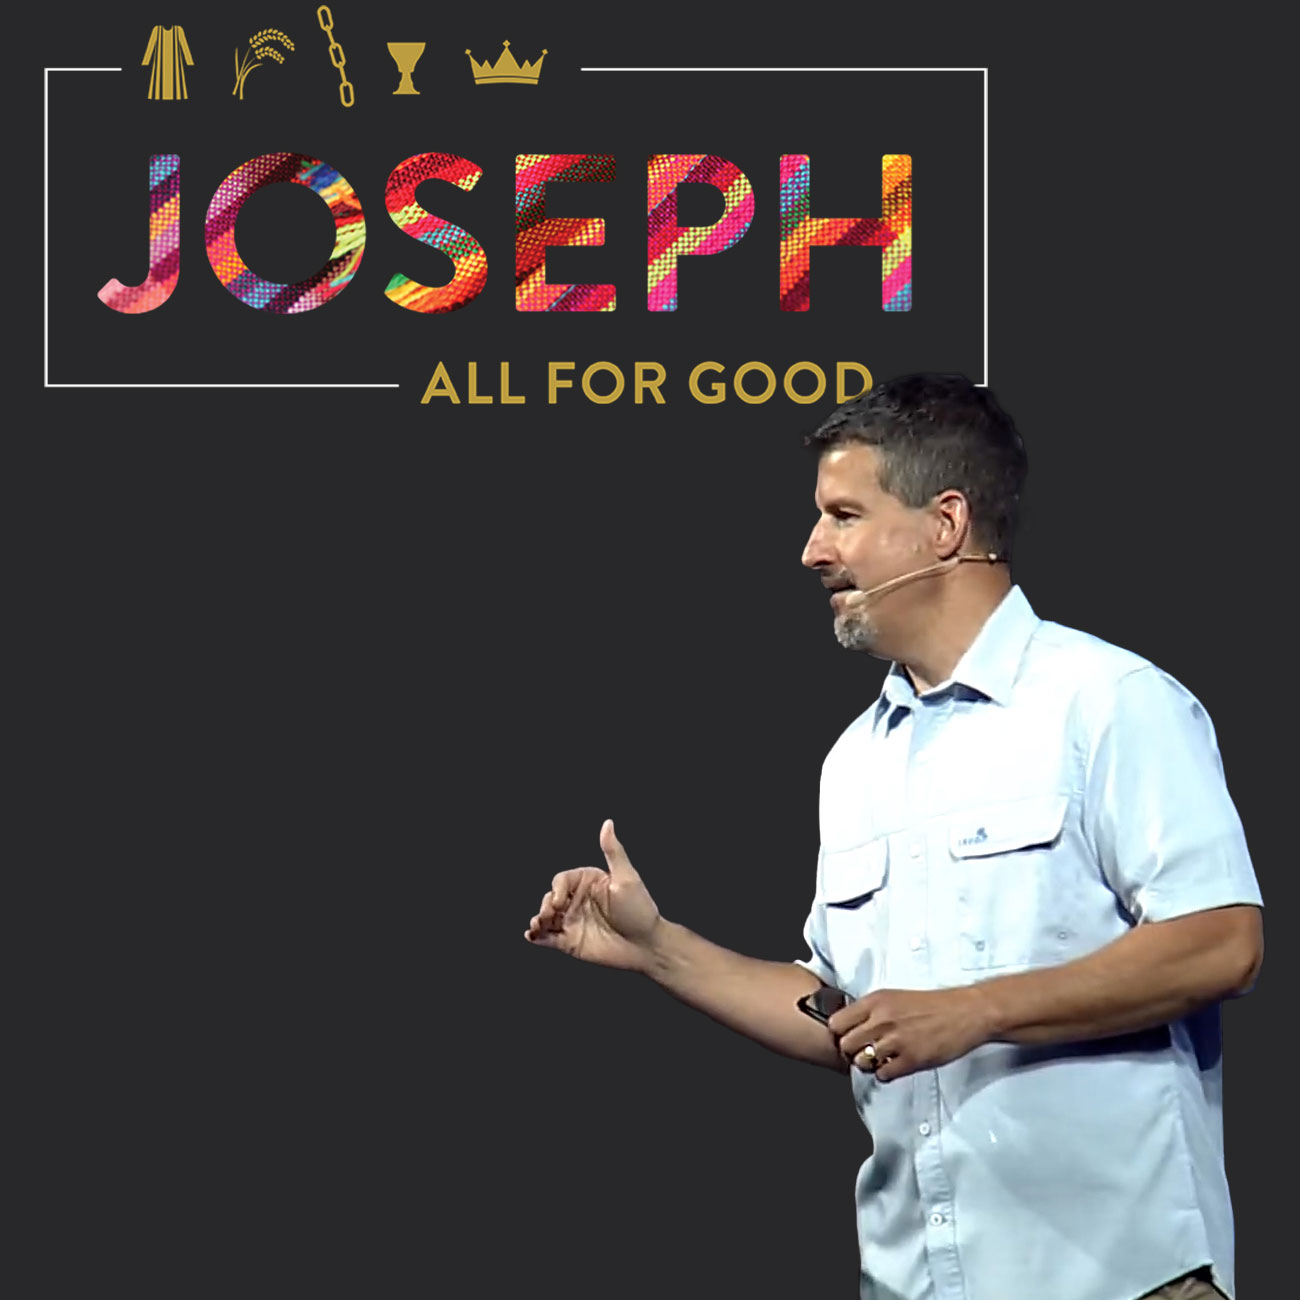 Joseph: All for Good - "In the Palace" [Pastor Joel Yates]